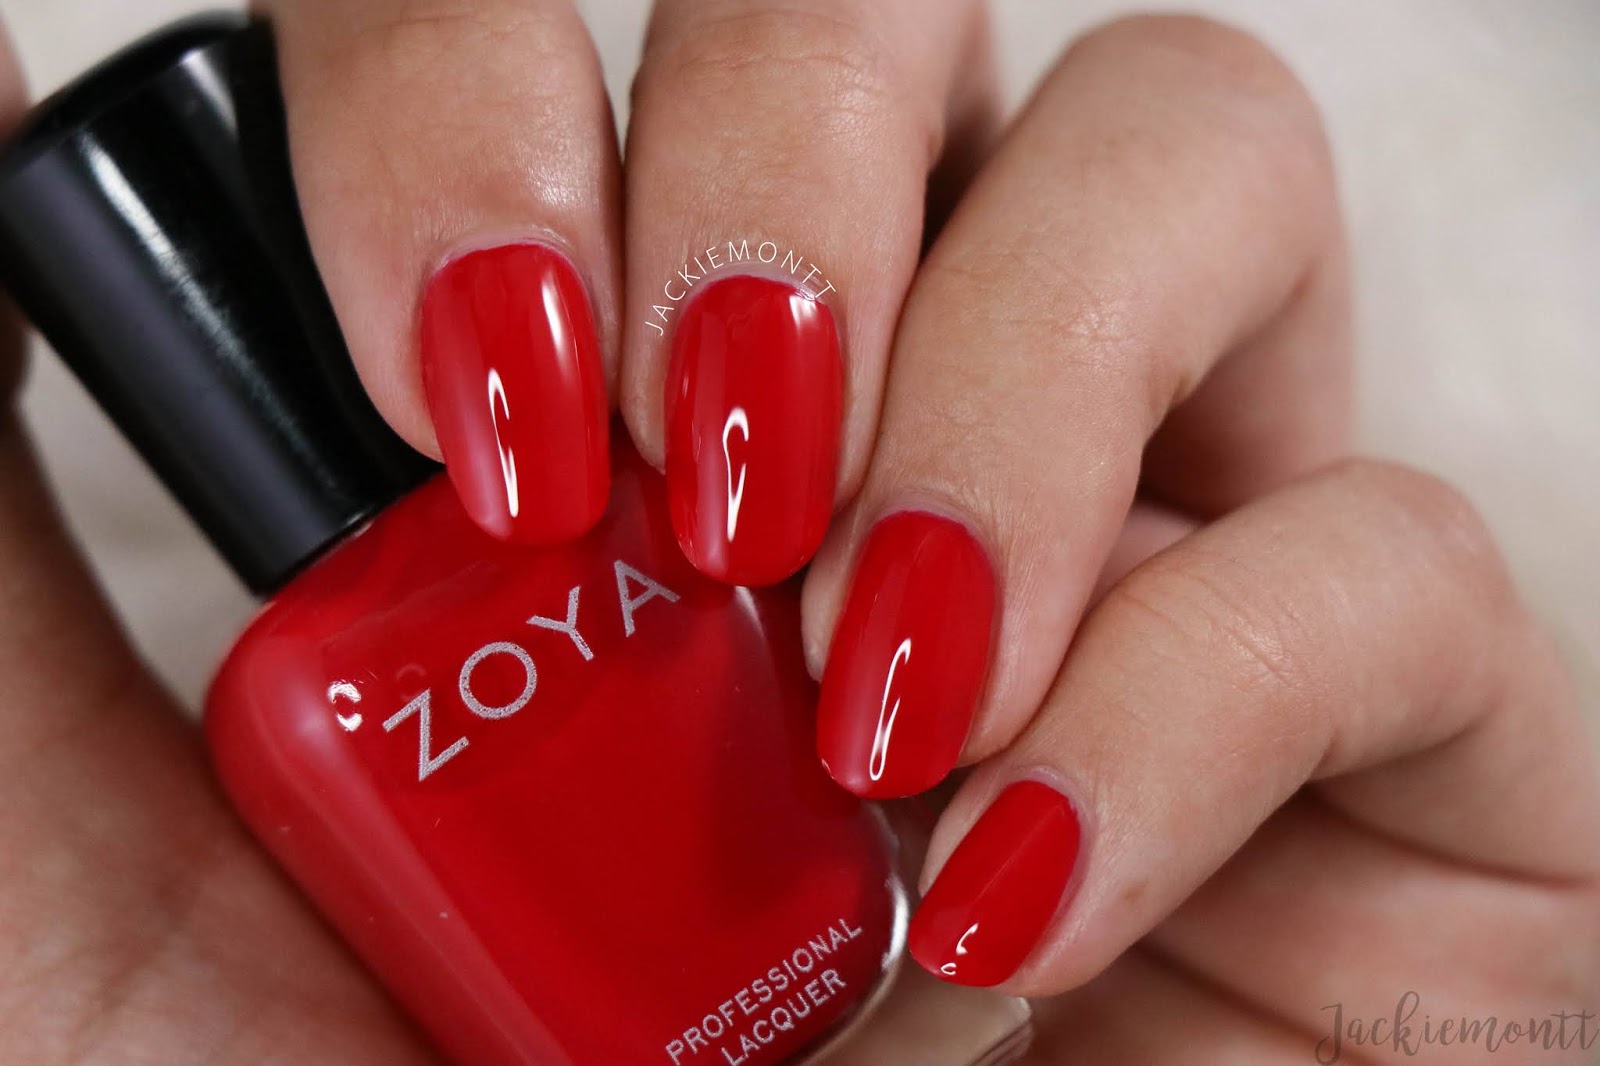 Zoya Holiday Gift Set Review & Swatches - JACKIEMONTT